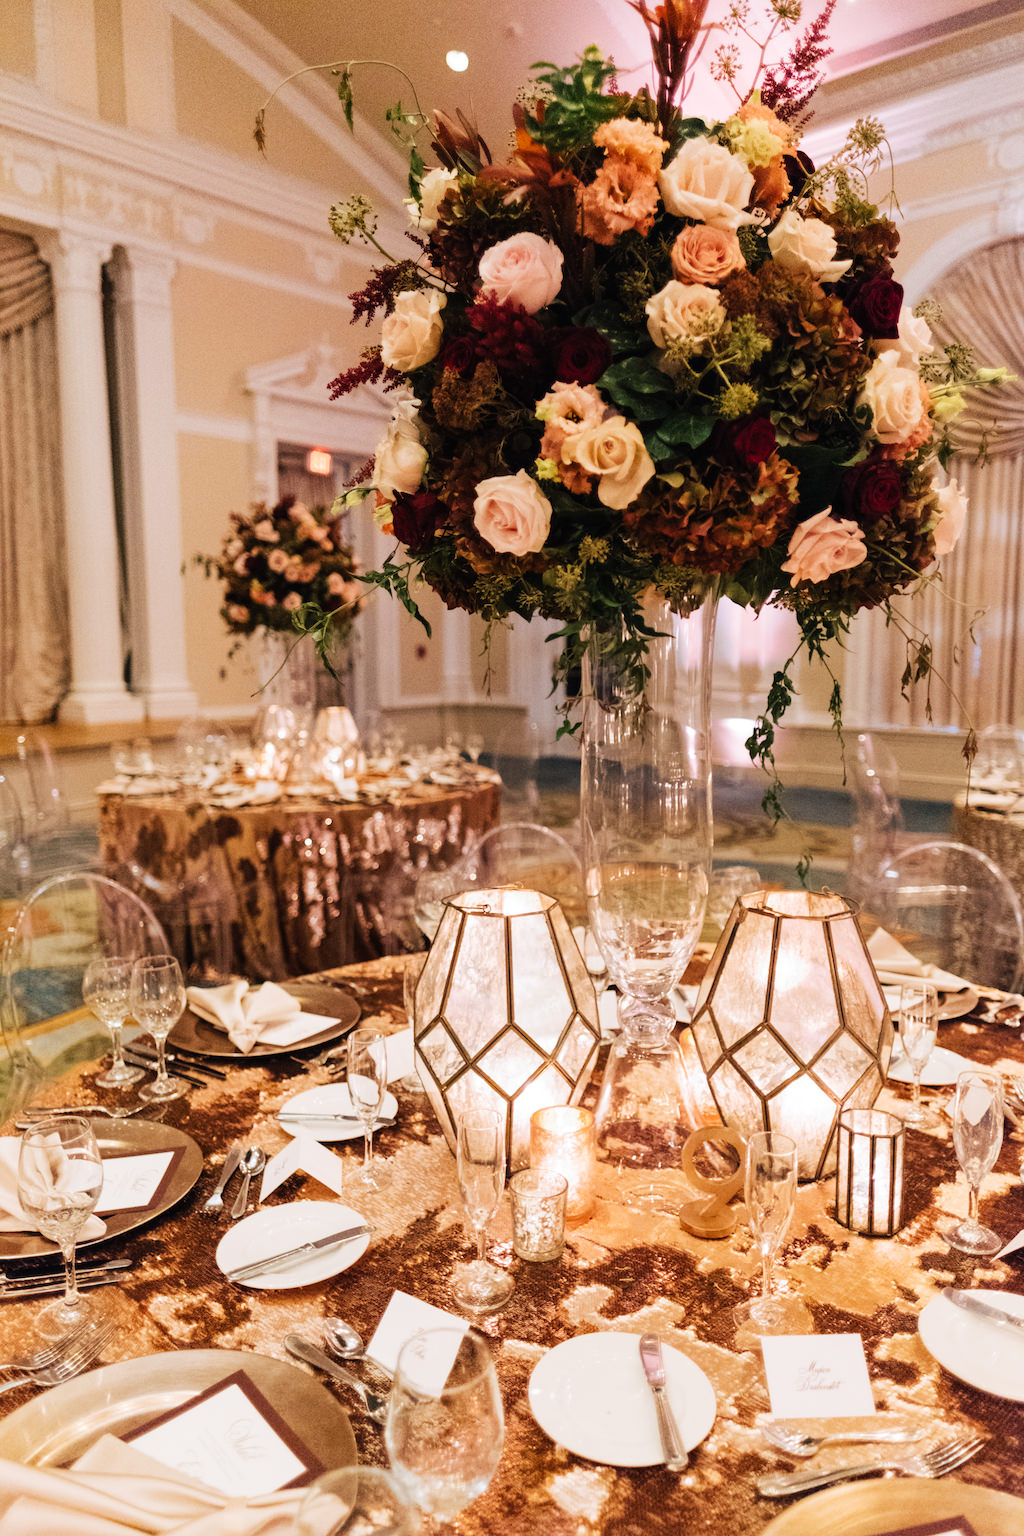 Elegant, Romantic Hotel Ballroom Wedding Reception Decor, Round Table with Gold Sequin Tablecloth, Tall Glass Vase with Burgundy, Blush Pink, Ivory and Greenery Floral Bouquet Centerpiece, White and Gold Geometric Candle Vases | Tampa Bay Wedding Planner Parties A'la Carte | St. Petersburg Hotel Wedding Venue The Vinoy Renaissance